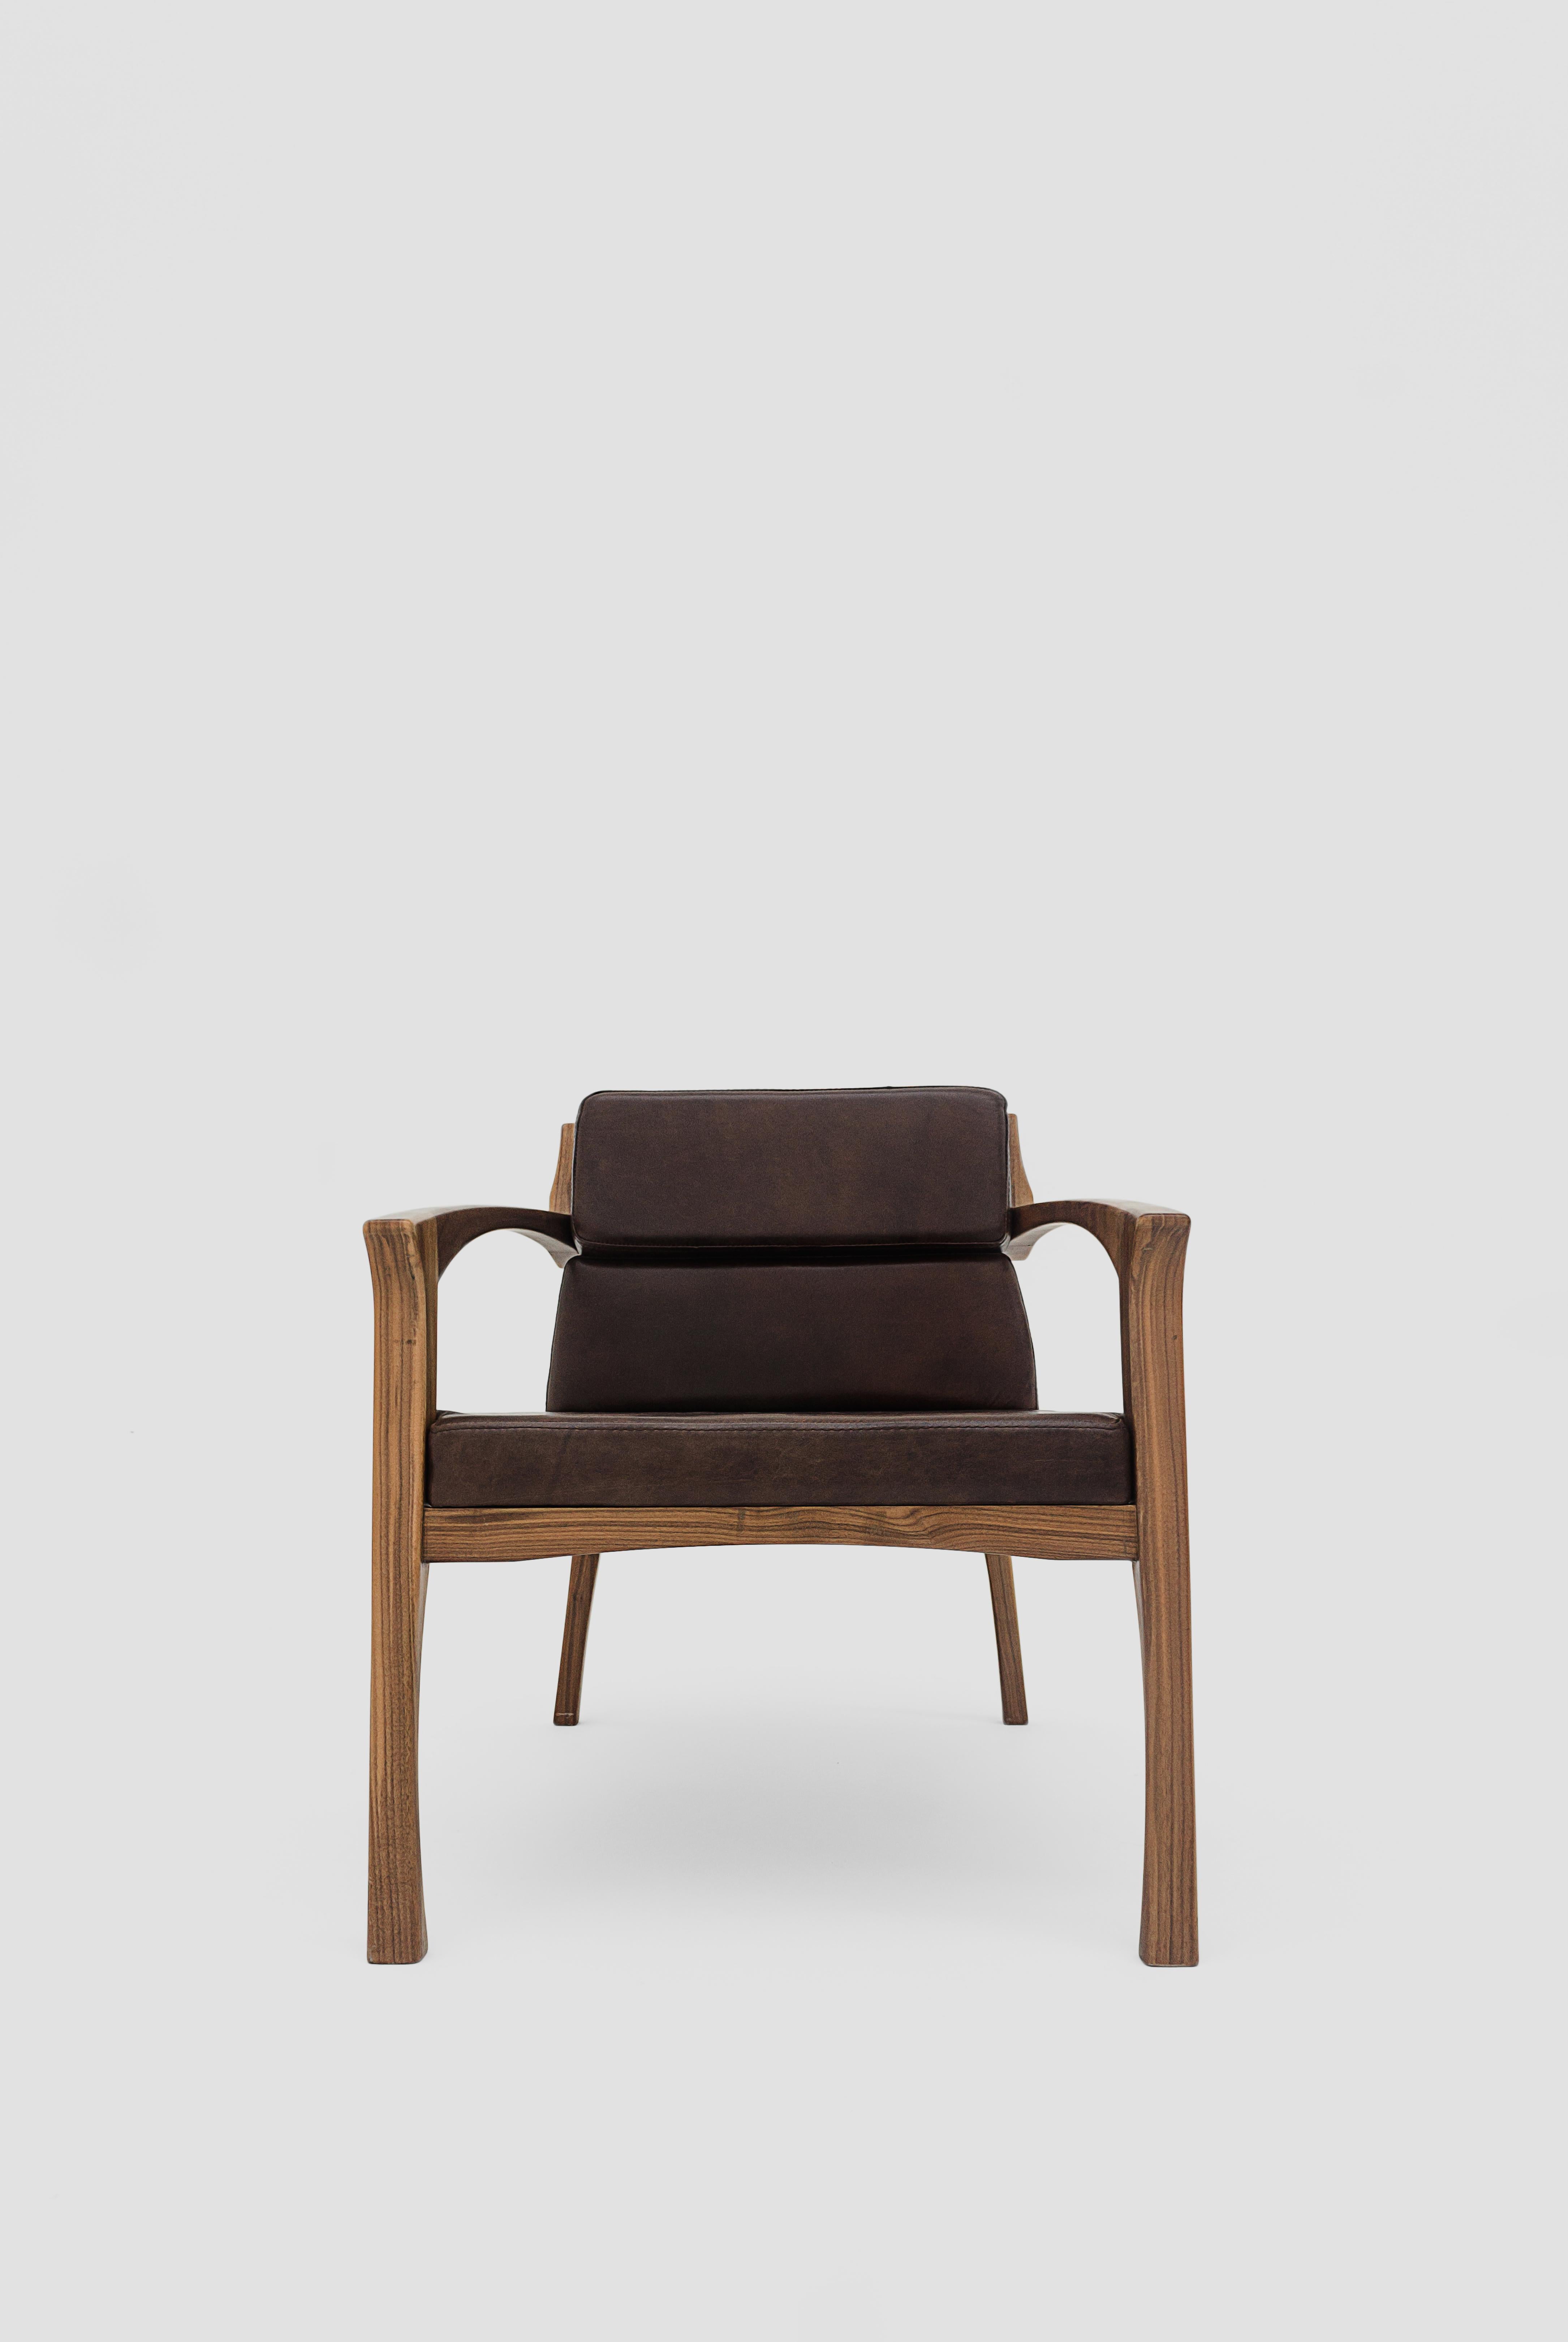 Set of 4 brown Helmut armchair by Arturo Verástegui
Dimensions: D 72 x W 76 x H 70 cm
Materials: walnut wood, leather.

Armchair made of solid holm walnut, leather.

Arturo Verástegui has been the director and founder of BREUER since 2015.